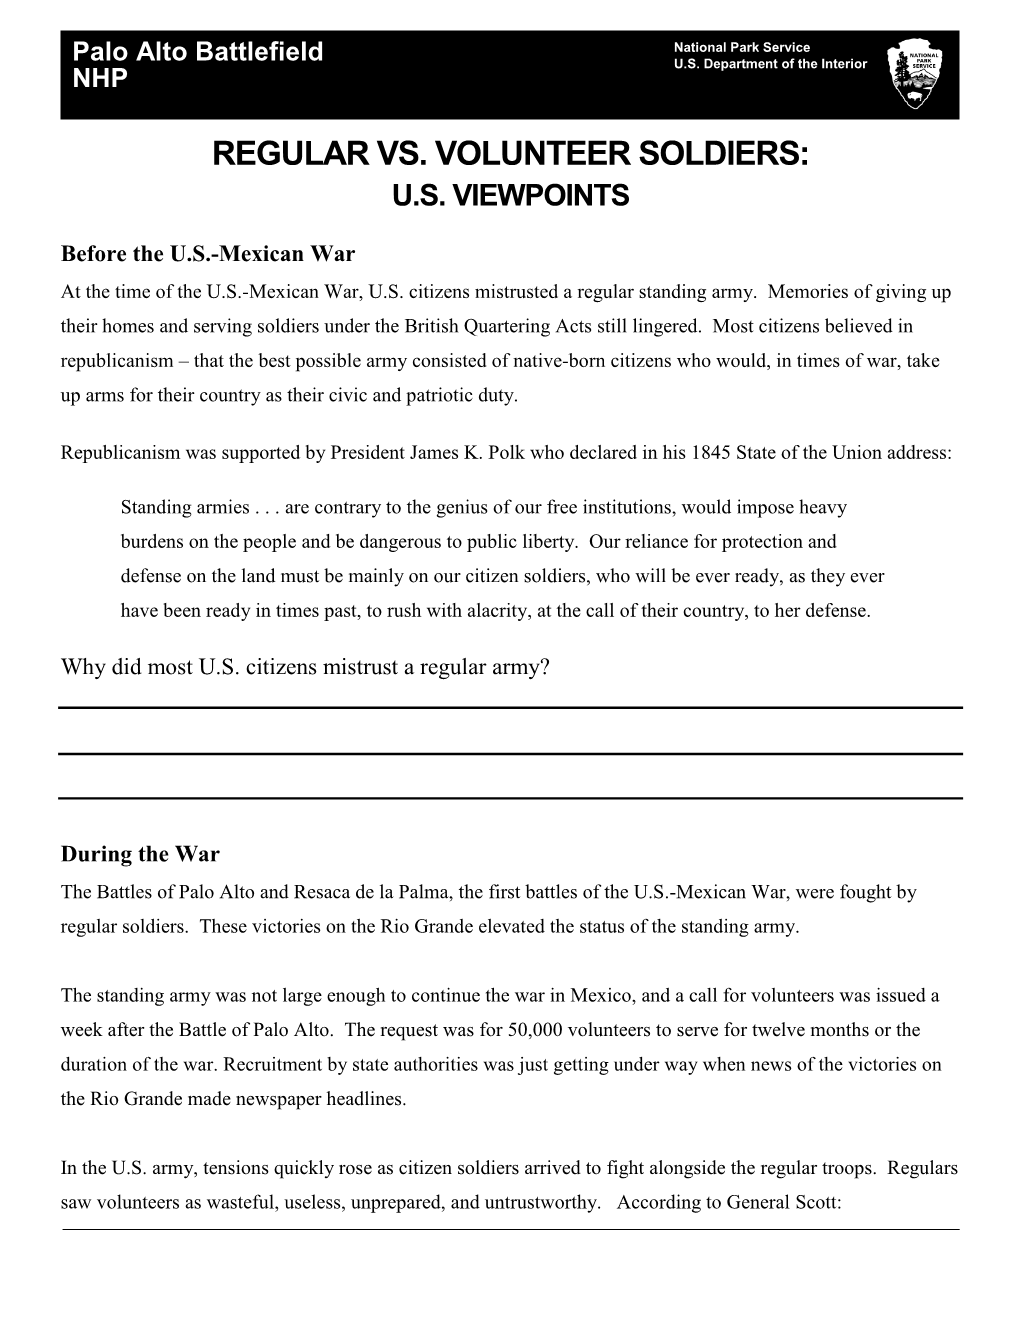 Download U.S. Viewpoints on a Standing Army